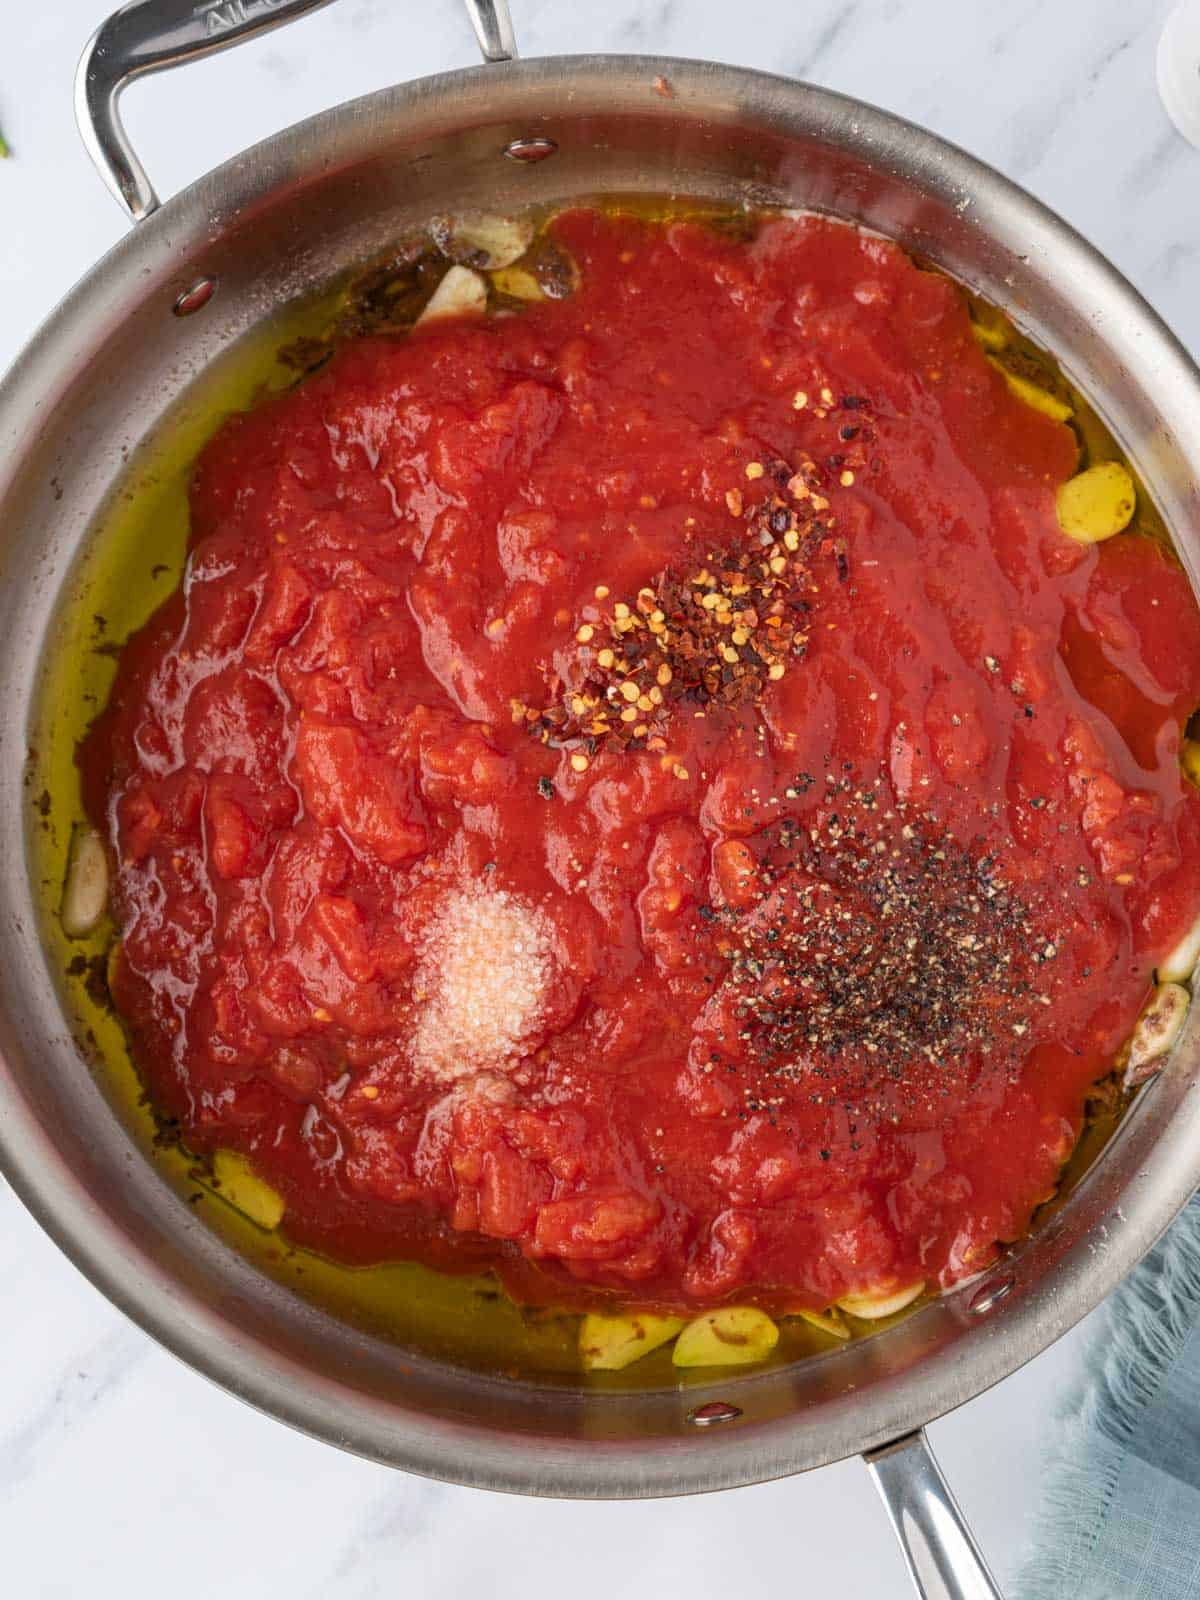 Tomato sauce and seasoning added to the pan.